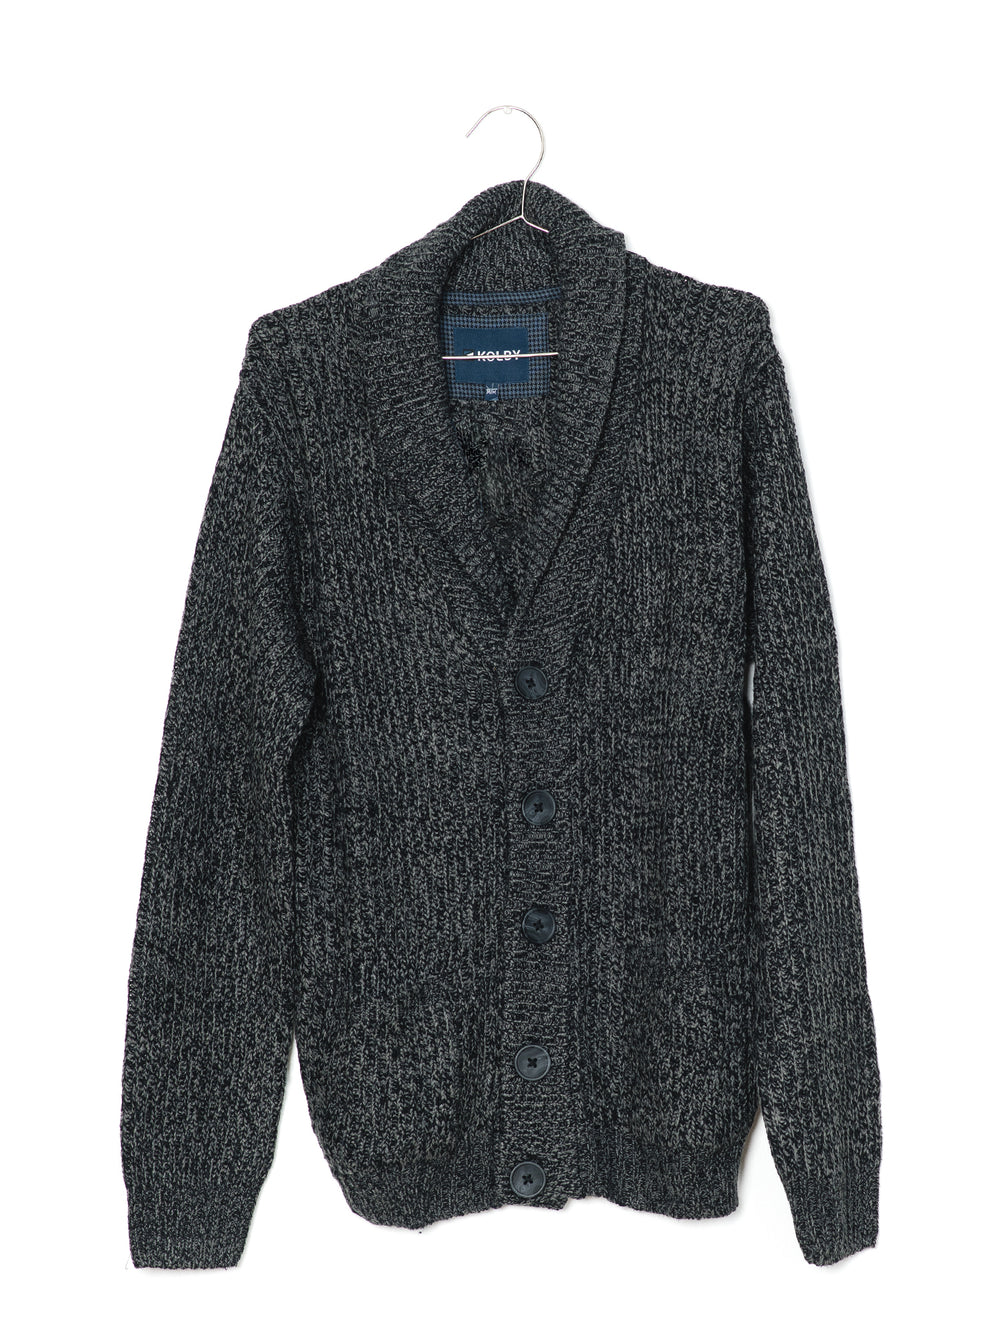 MENS WALTER BUTTON UP CARDI - CLEARANCE